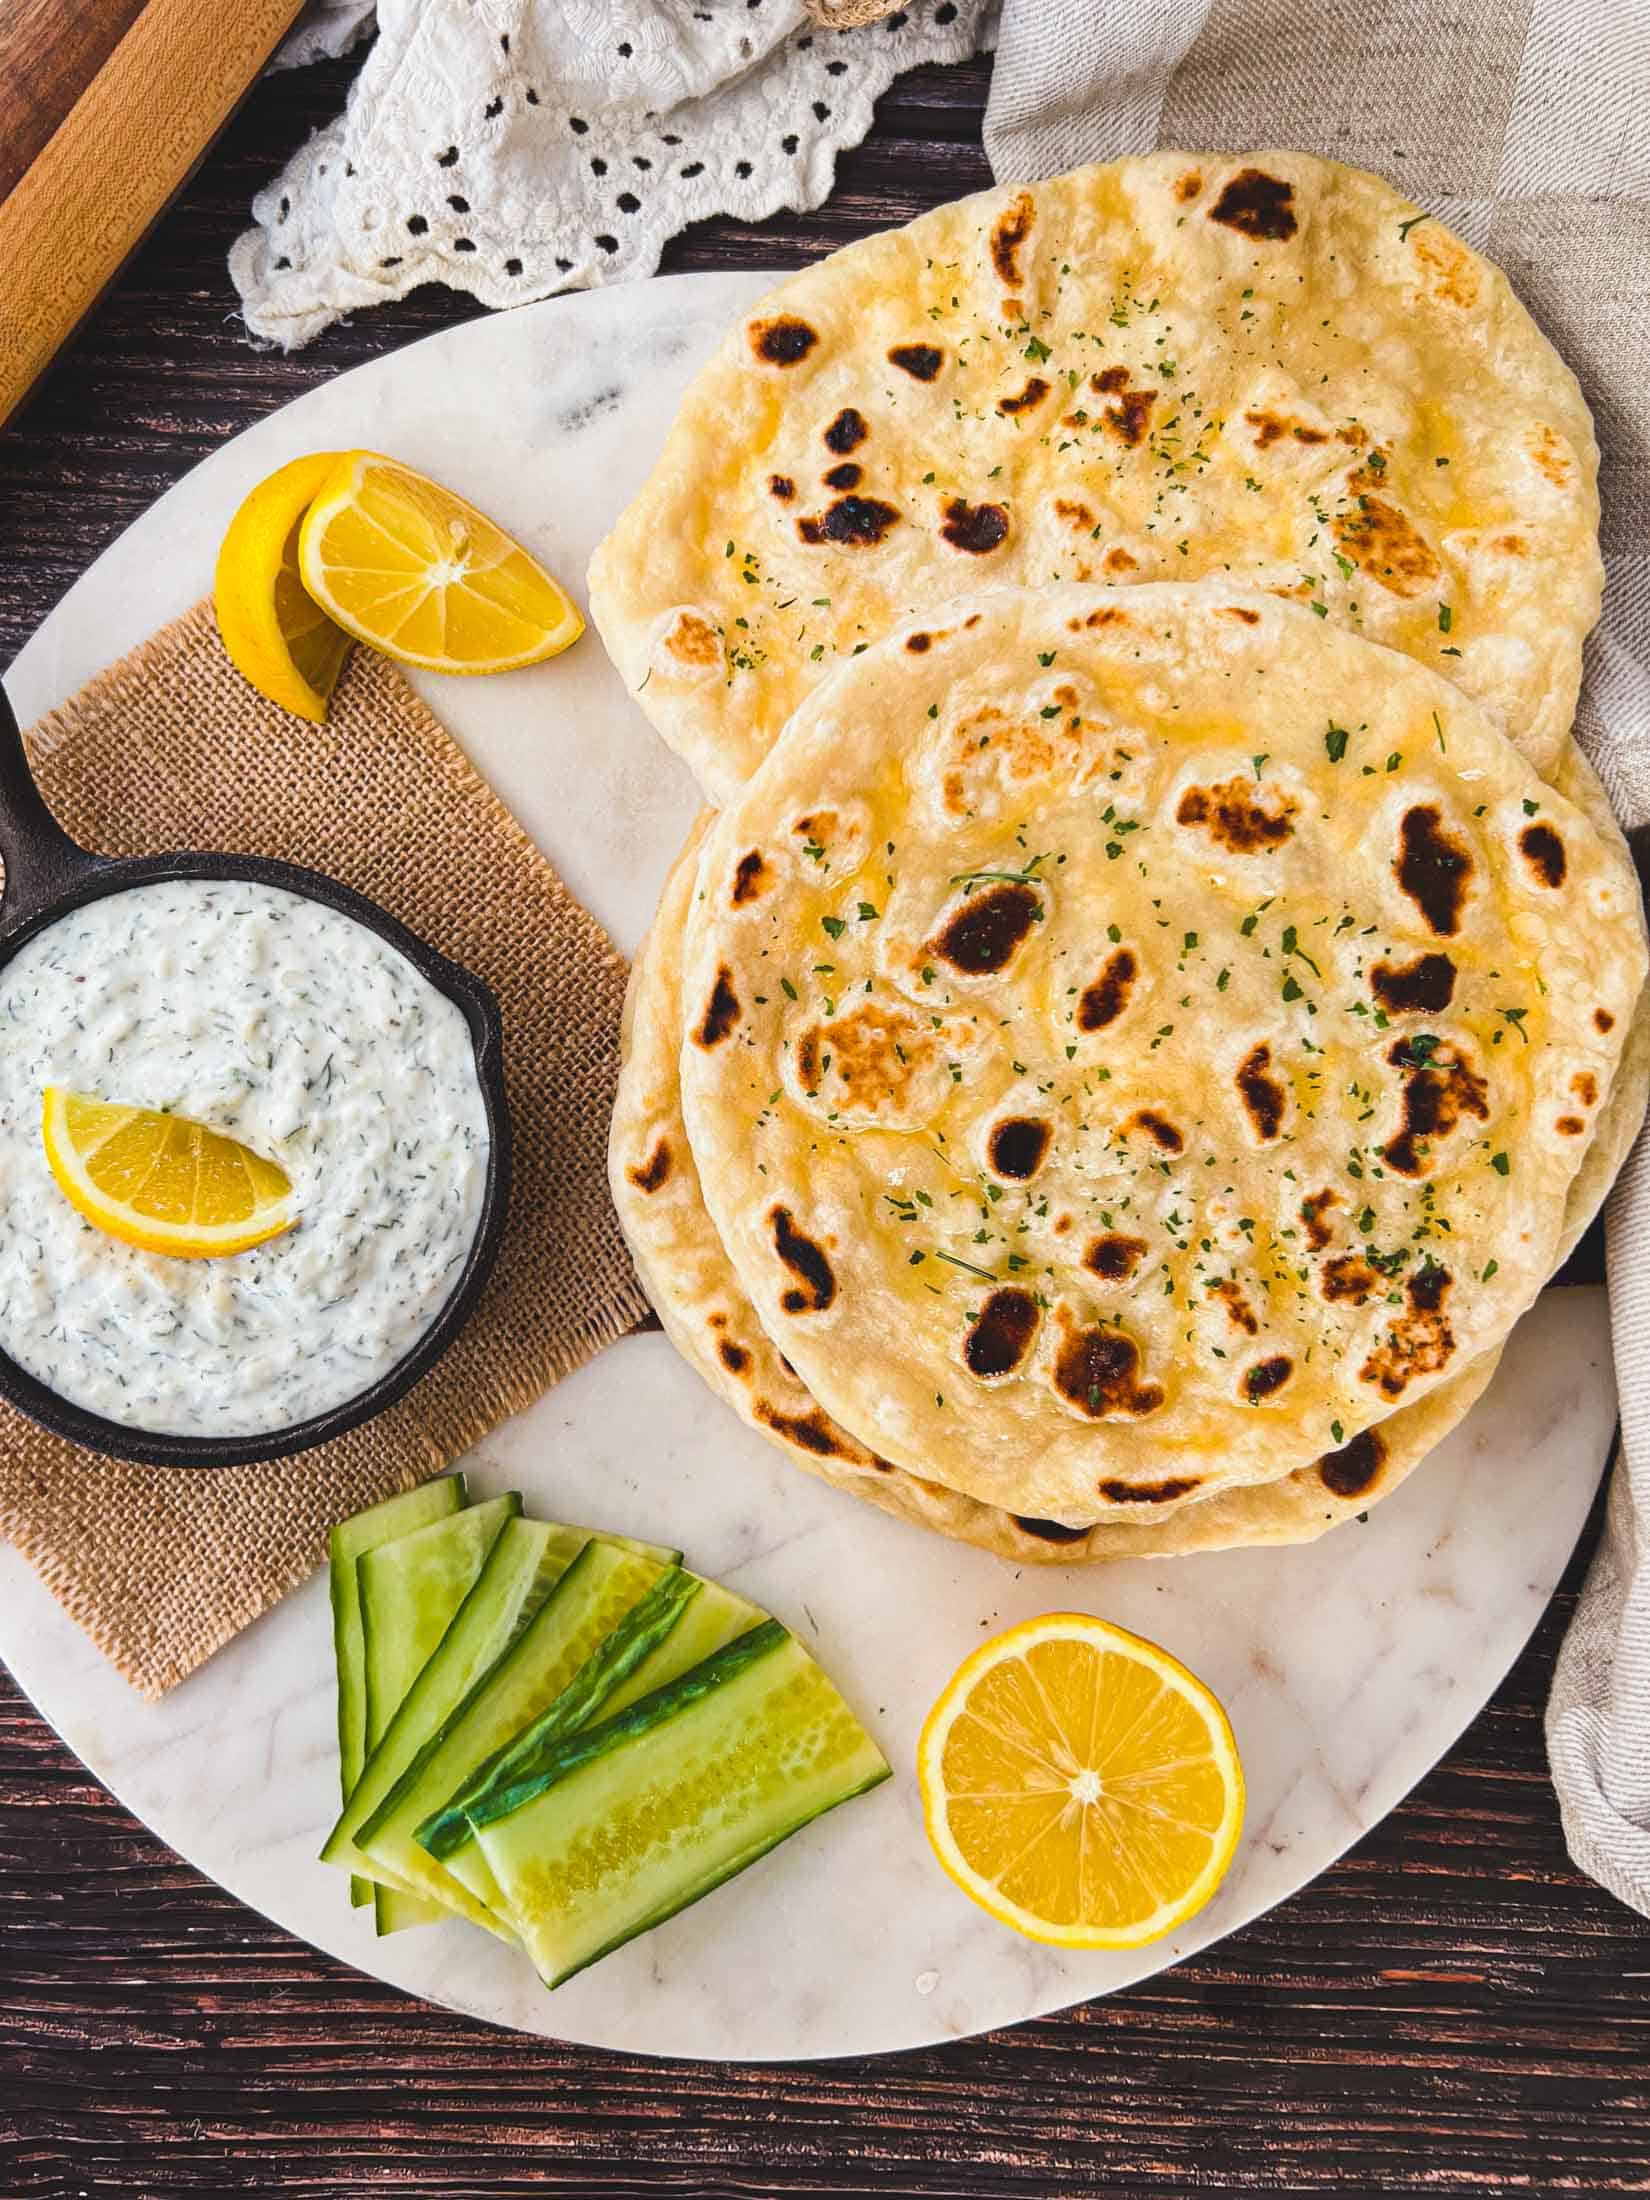 Sourdough naan bread piled up with lemons, cucumbers, and taztziki.